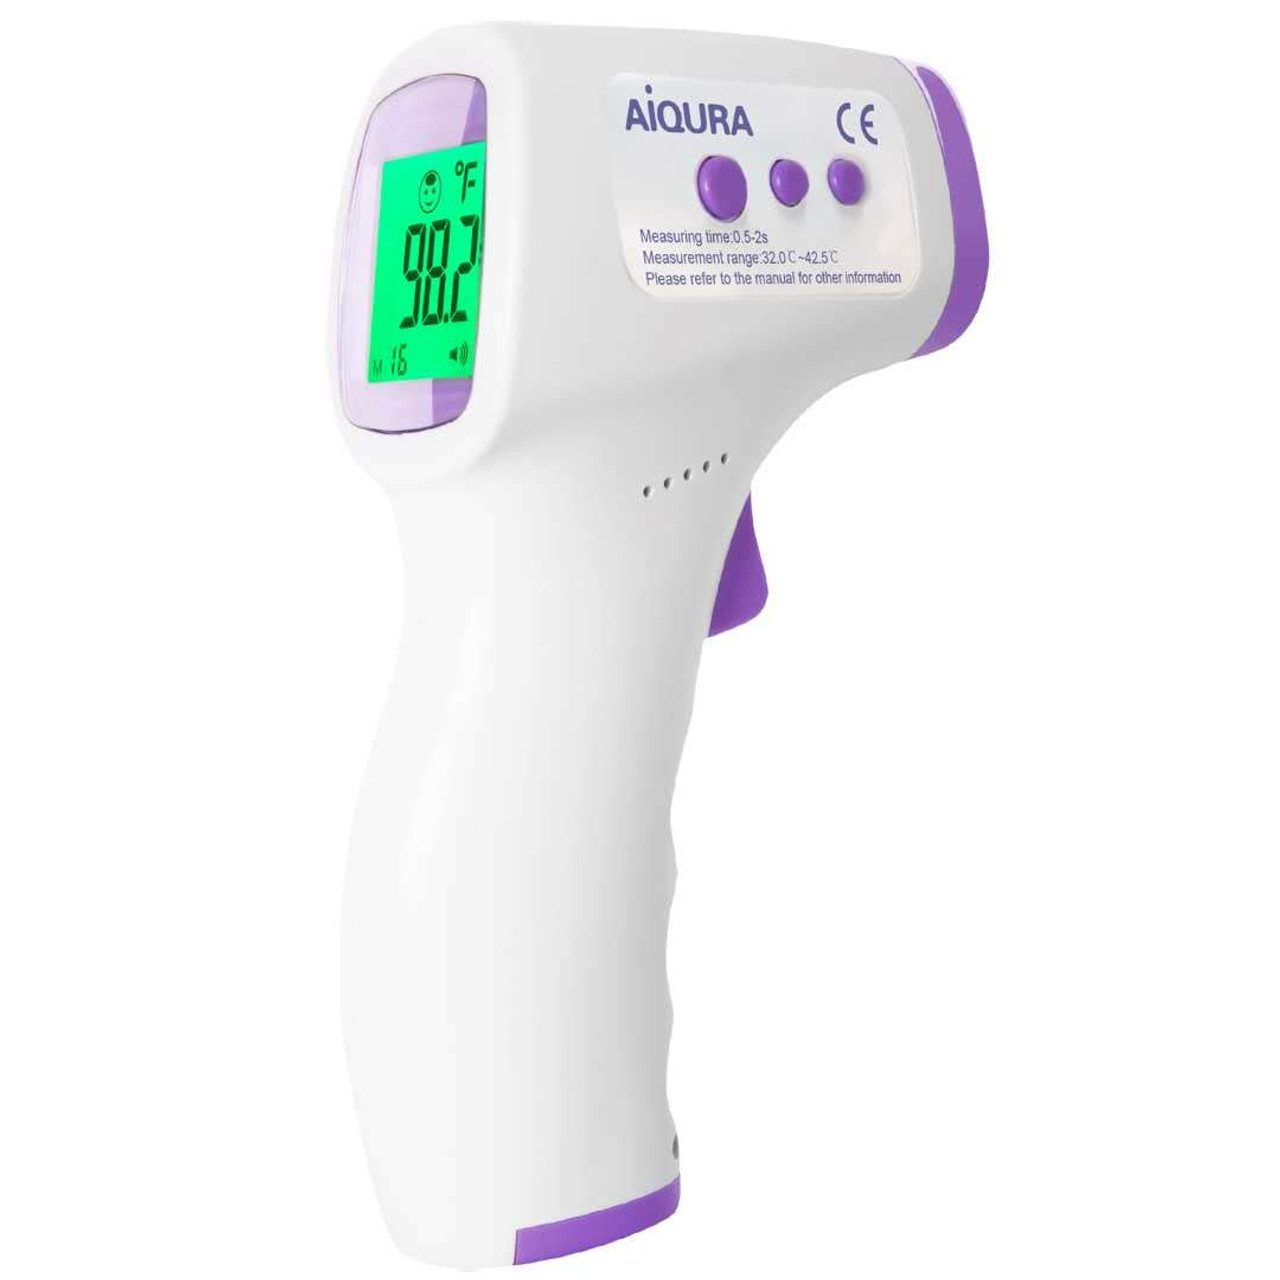 Infrared Forehead Thermometer - Tenergy